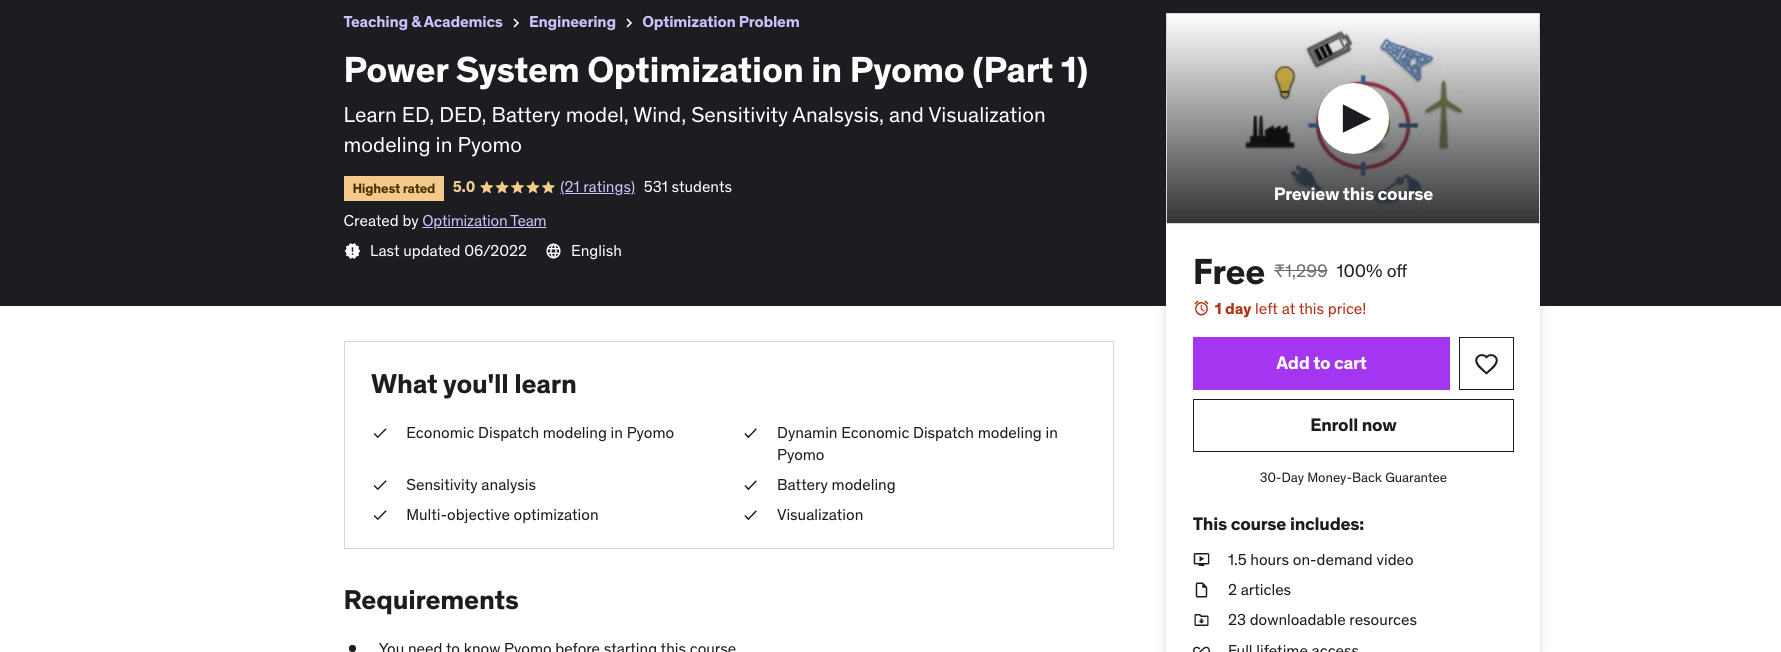 Power System Optimization in Pyomo (Part 1)